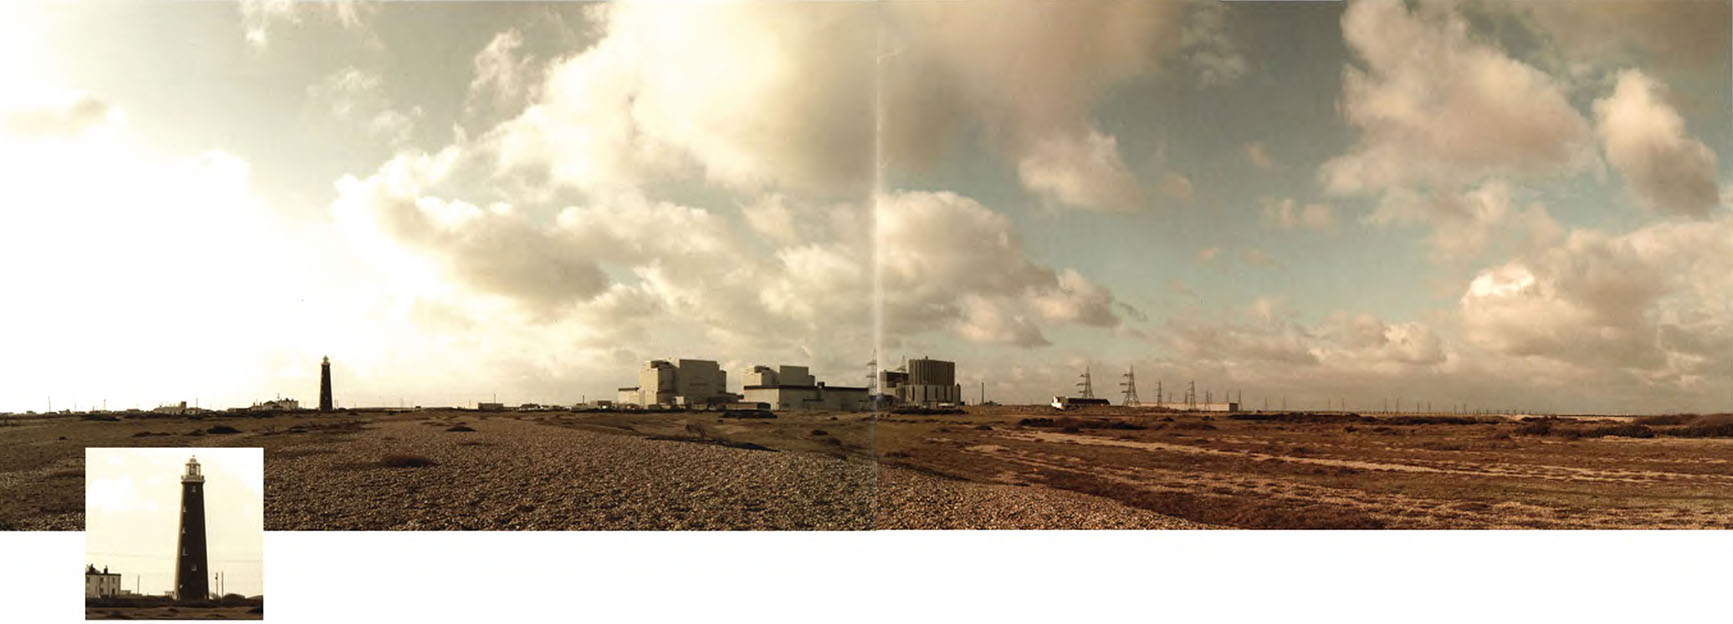 Dungeness Nuclear Power Station Panorama images give a wonderful sense of vastness. This image of Dungeness was made up of 11 images. One of the main advantages of a panorama is the level of detail you can include. As you can see from the lighthouse detail, this image could be printed up to 80cm [c. 2½ft] wide and suffer no loss of quality.